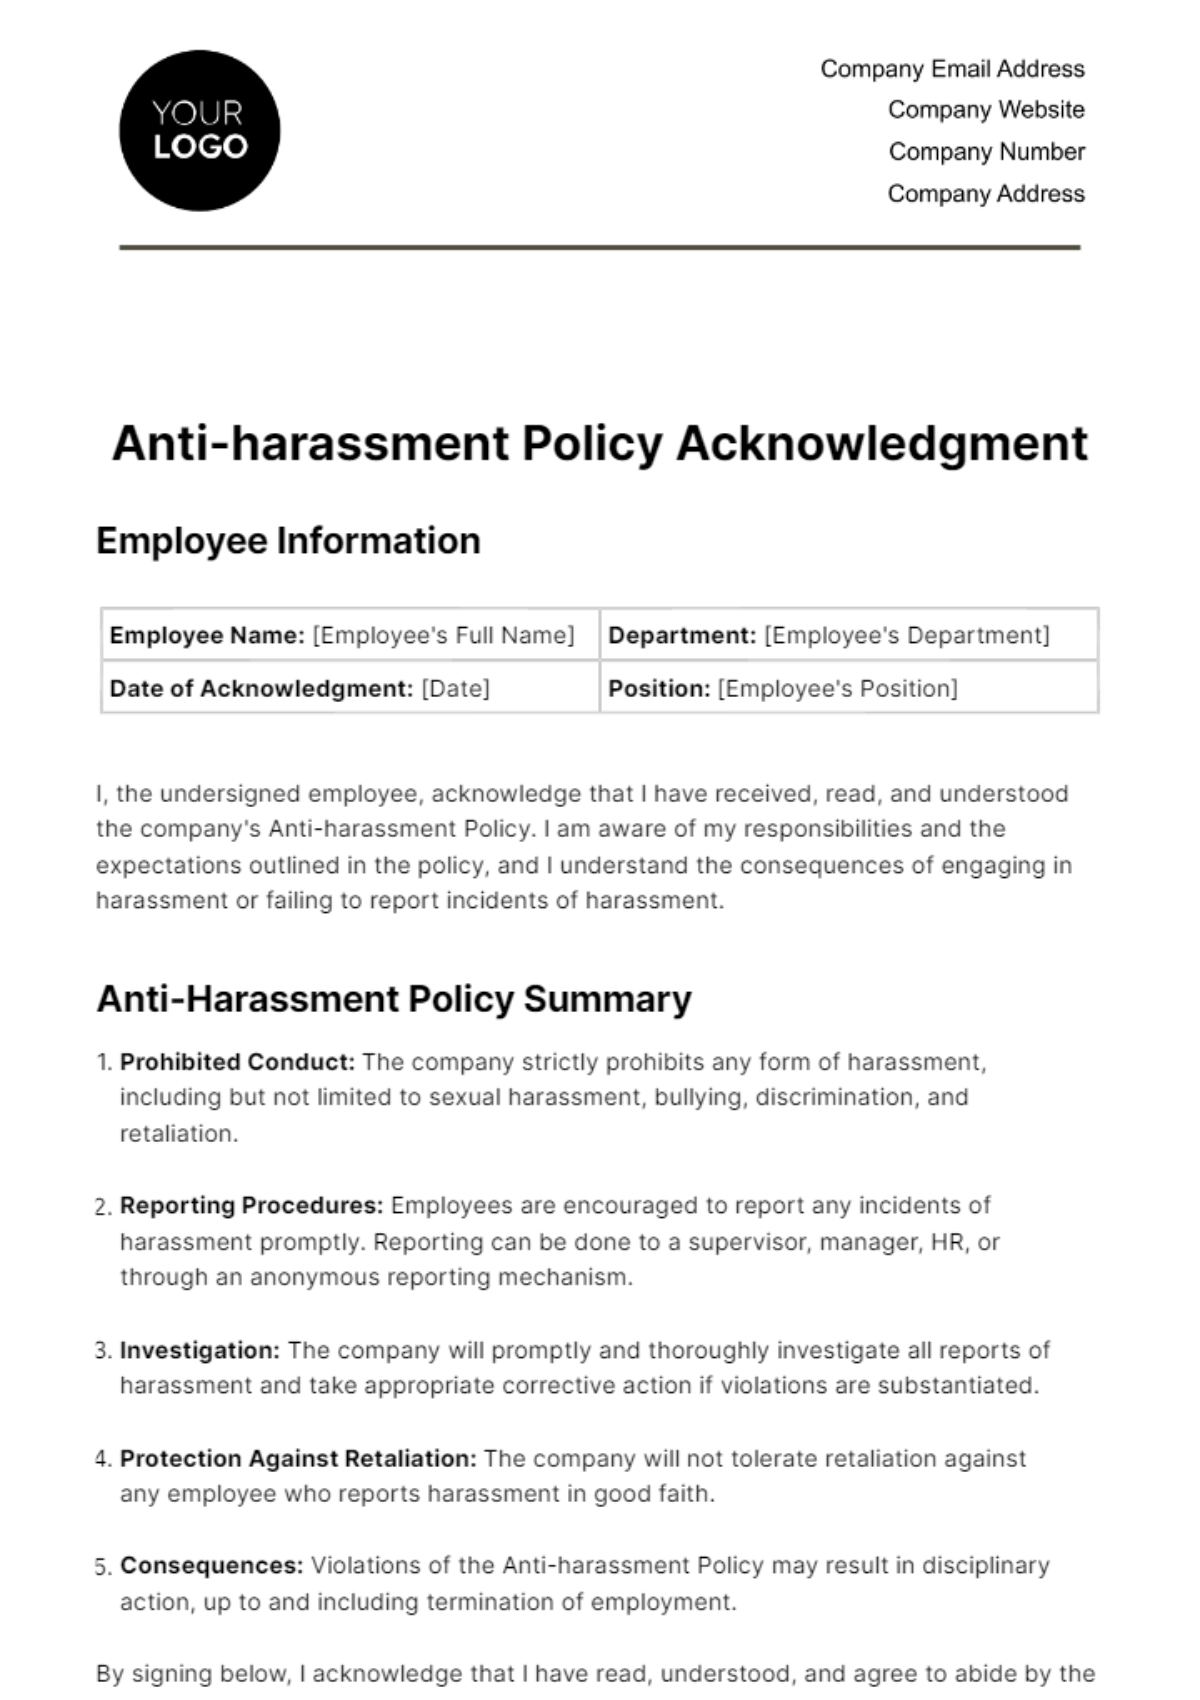 Anti-harassment Policy Acknowledgment HR Template